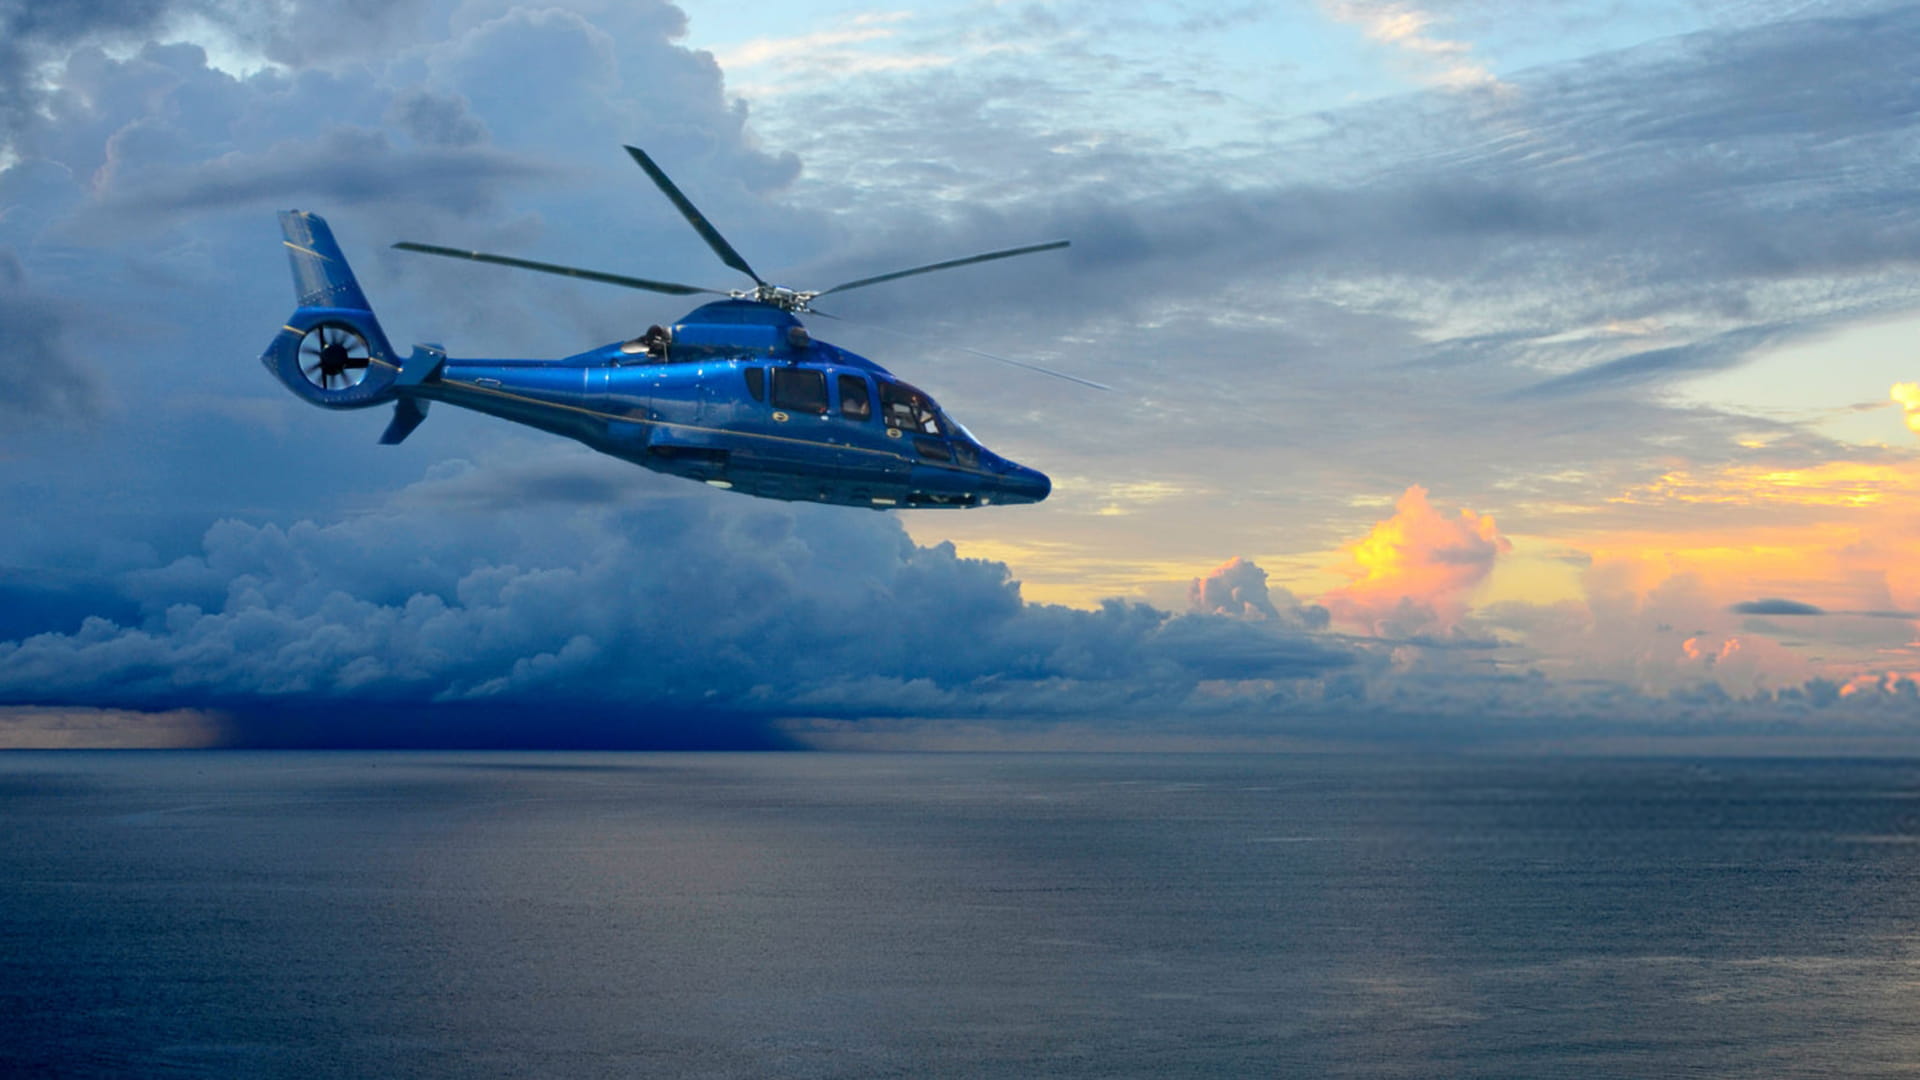 helicopter flying above ocean with dark blue clouds in the background